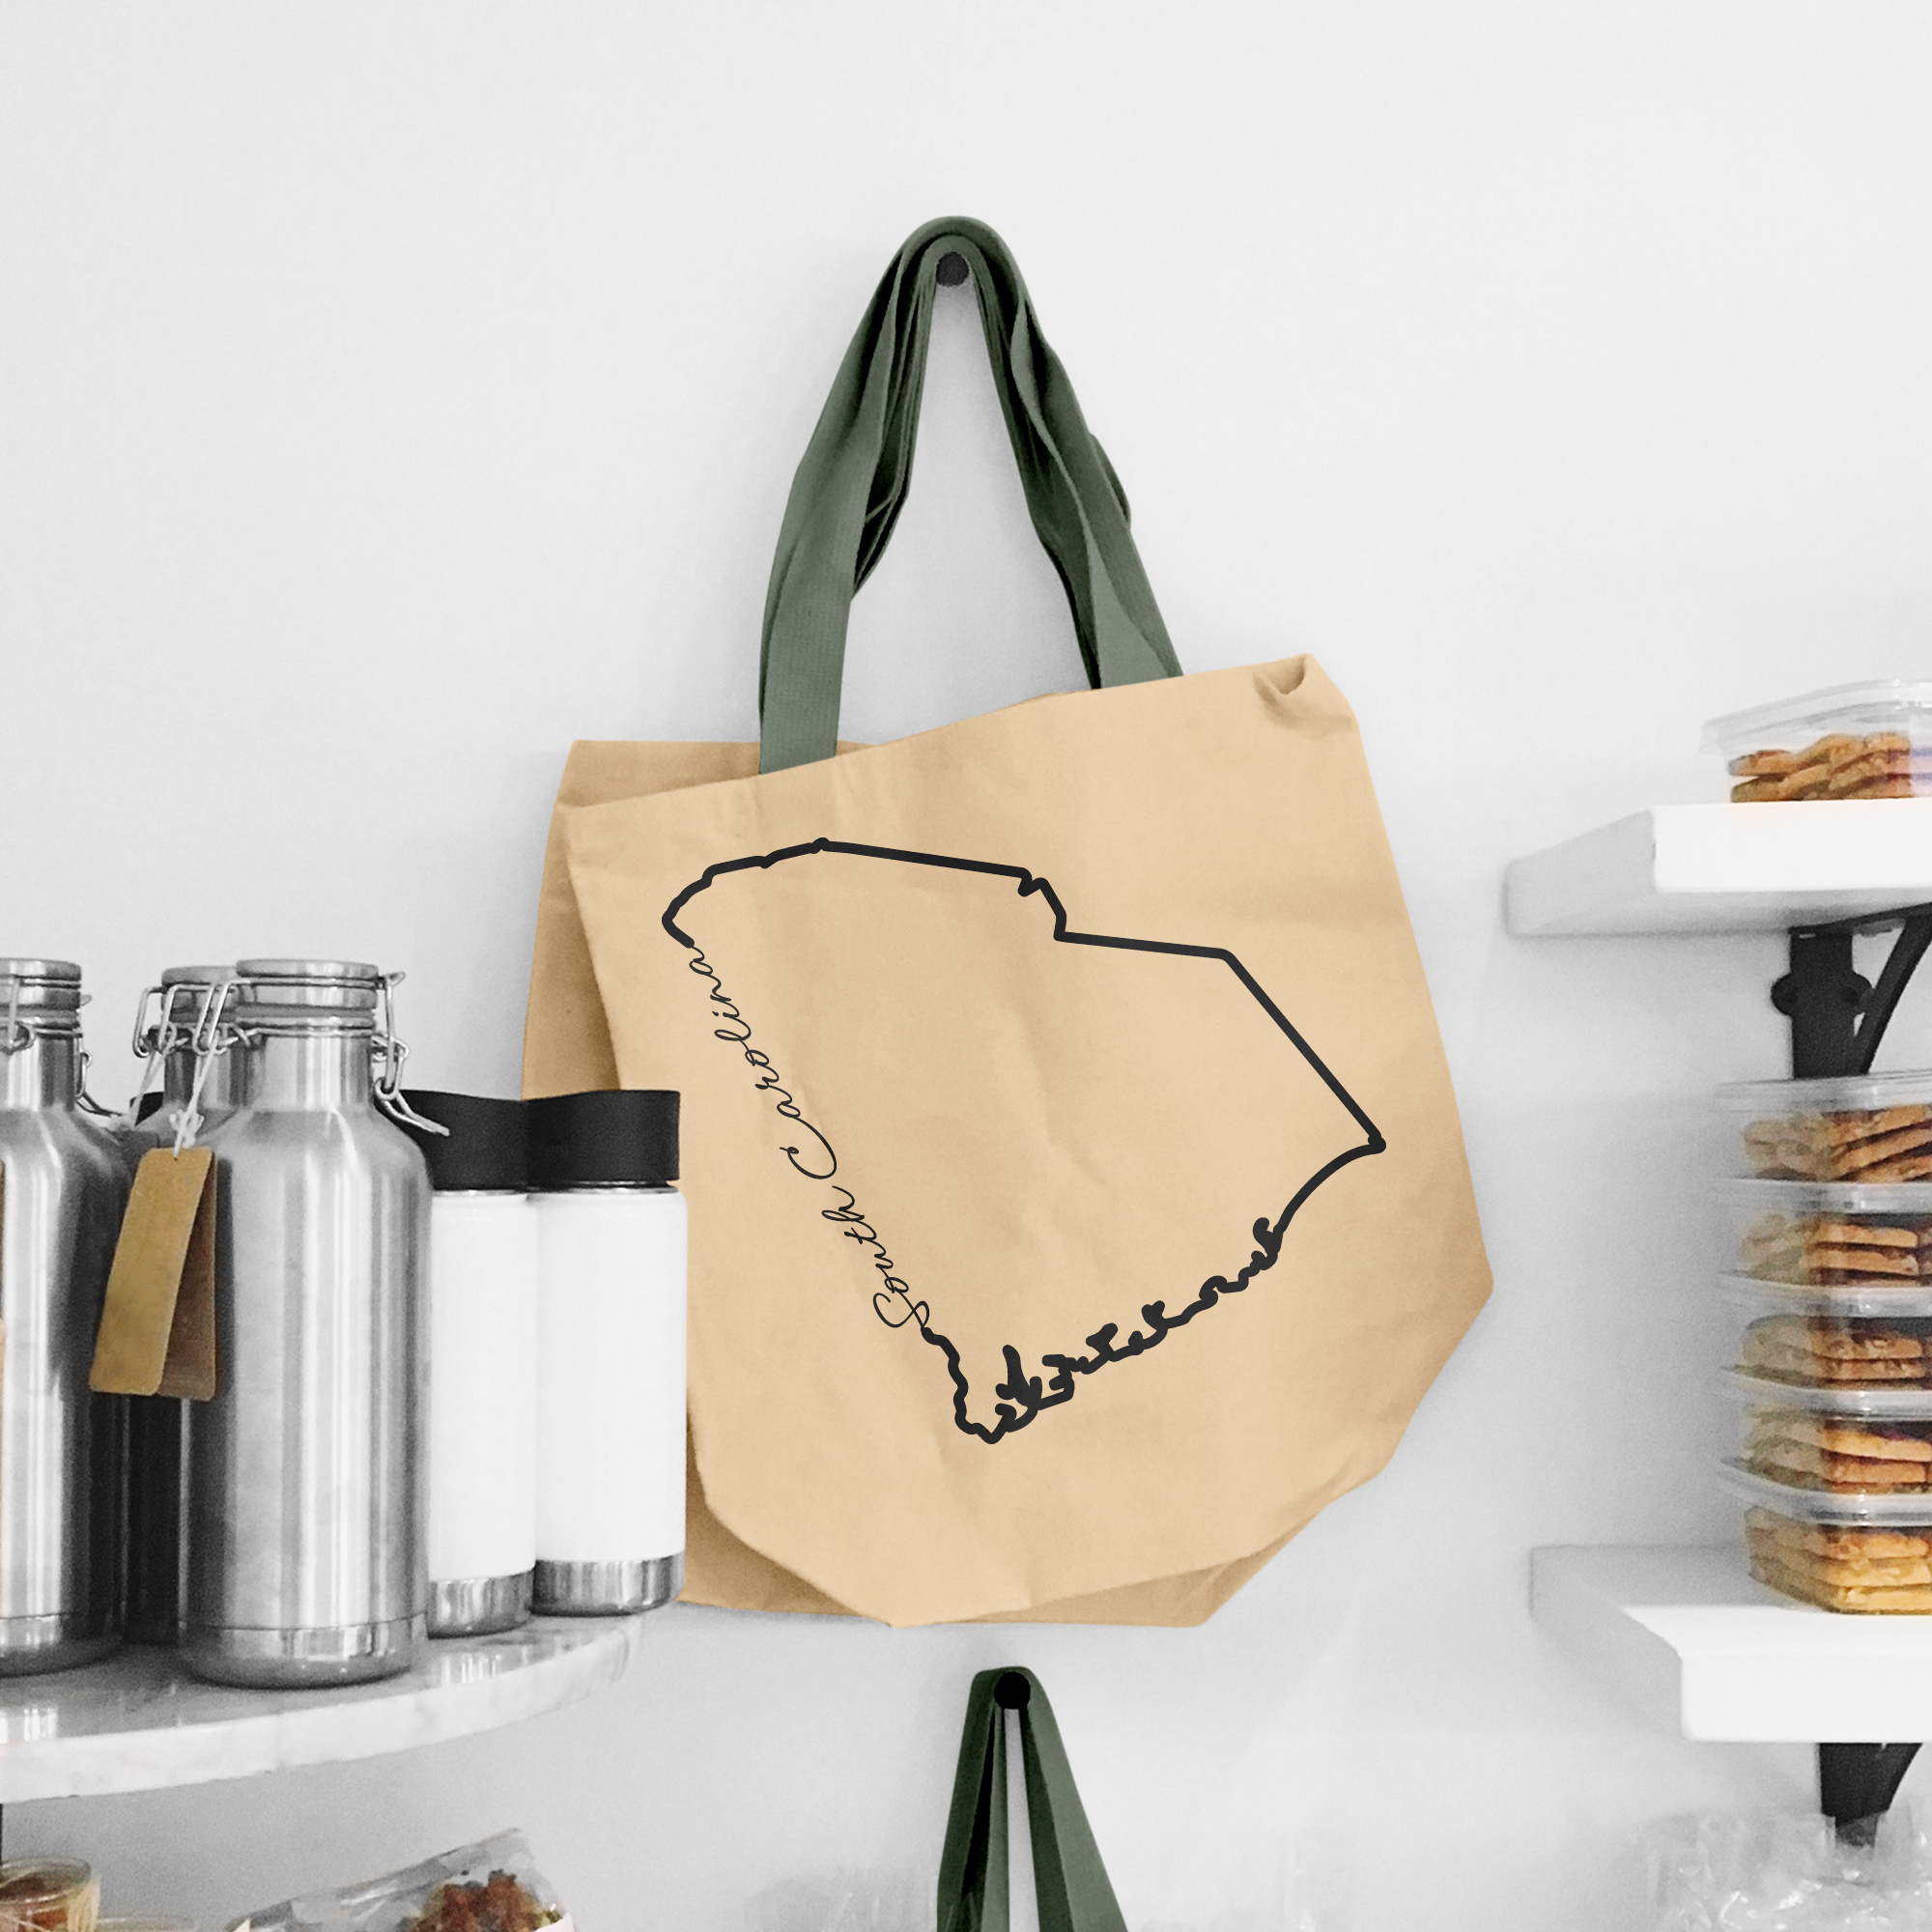 Black illustration of map of South Carolina on the beige shopping bag with dirty green handle.